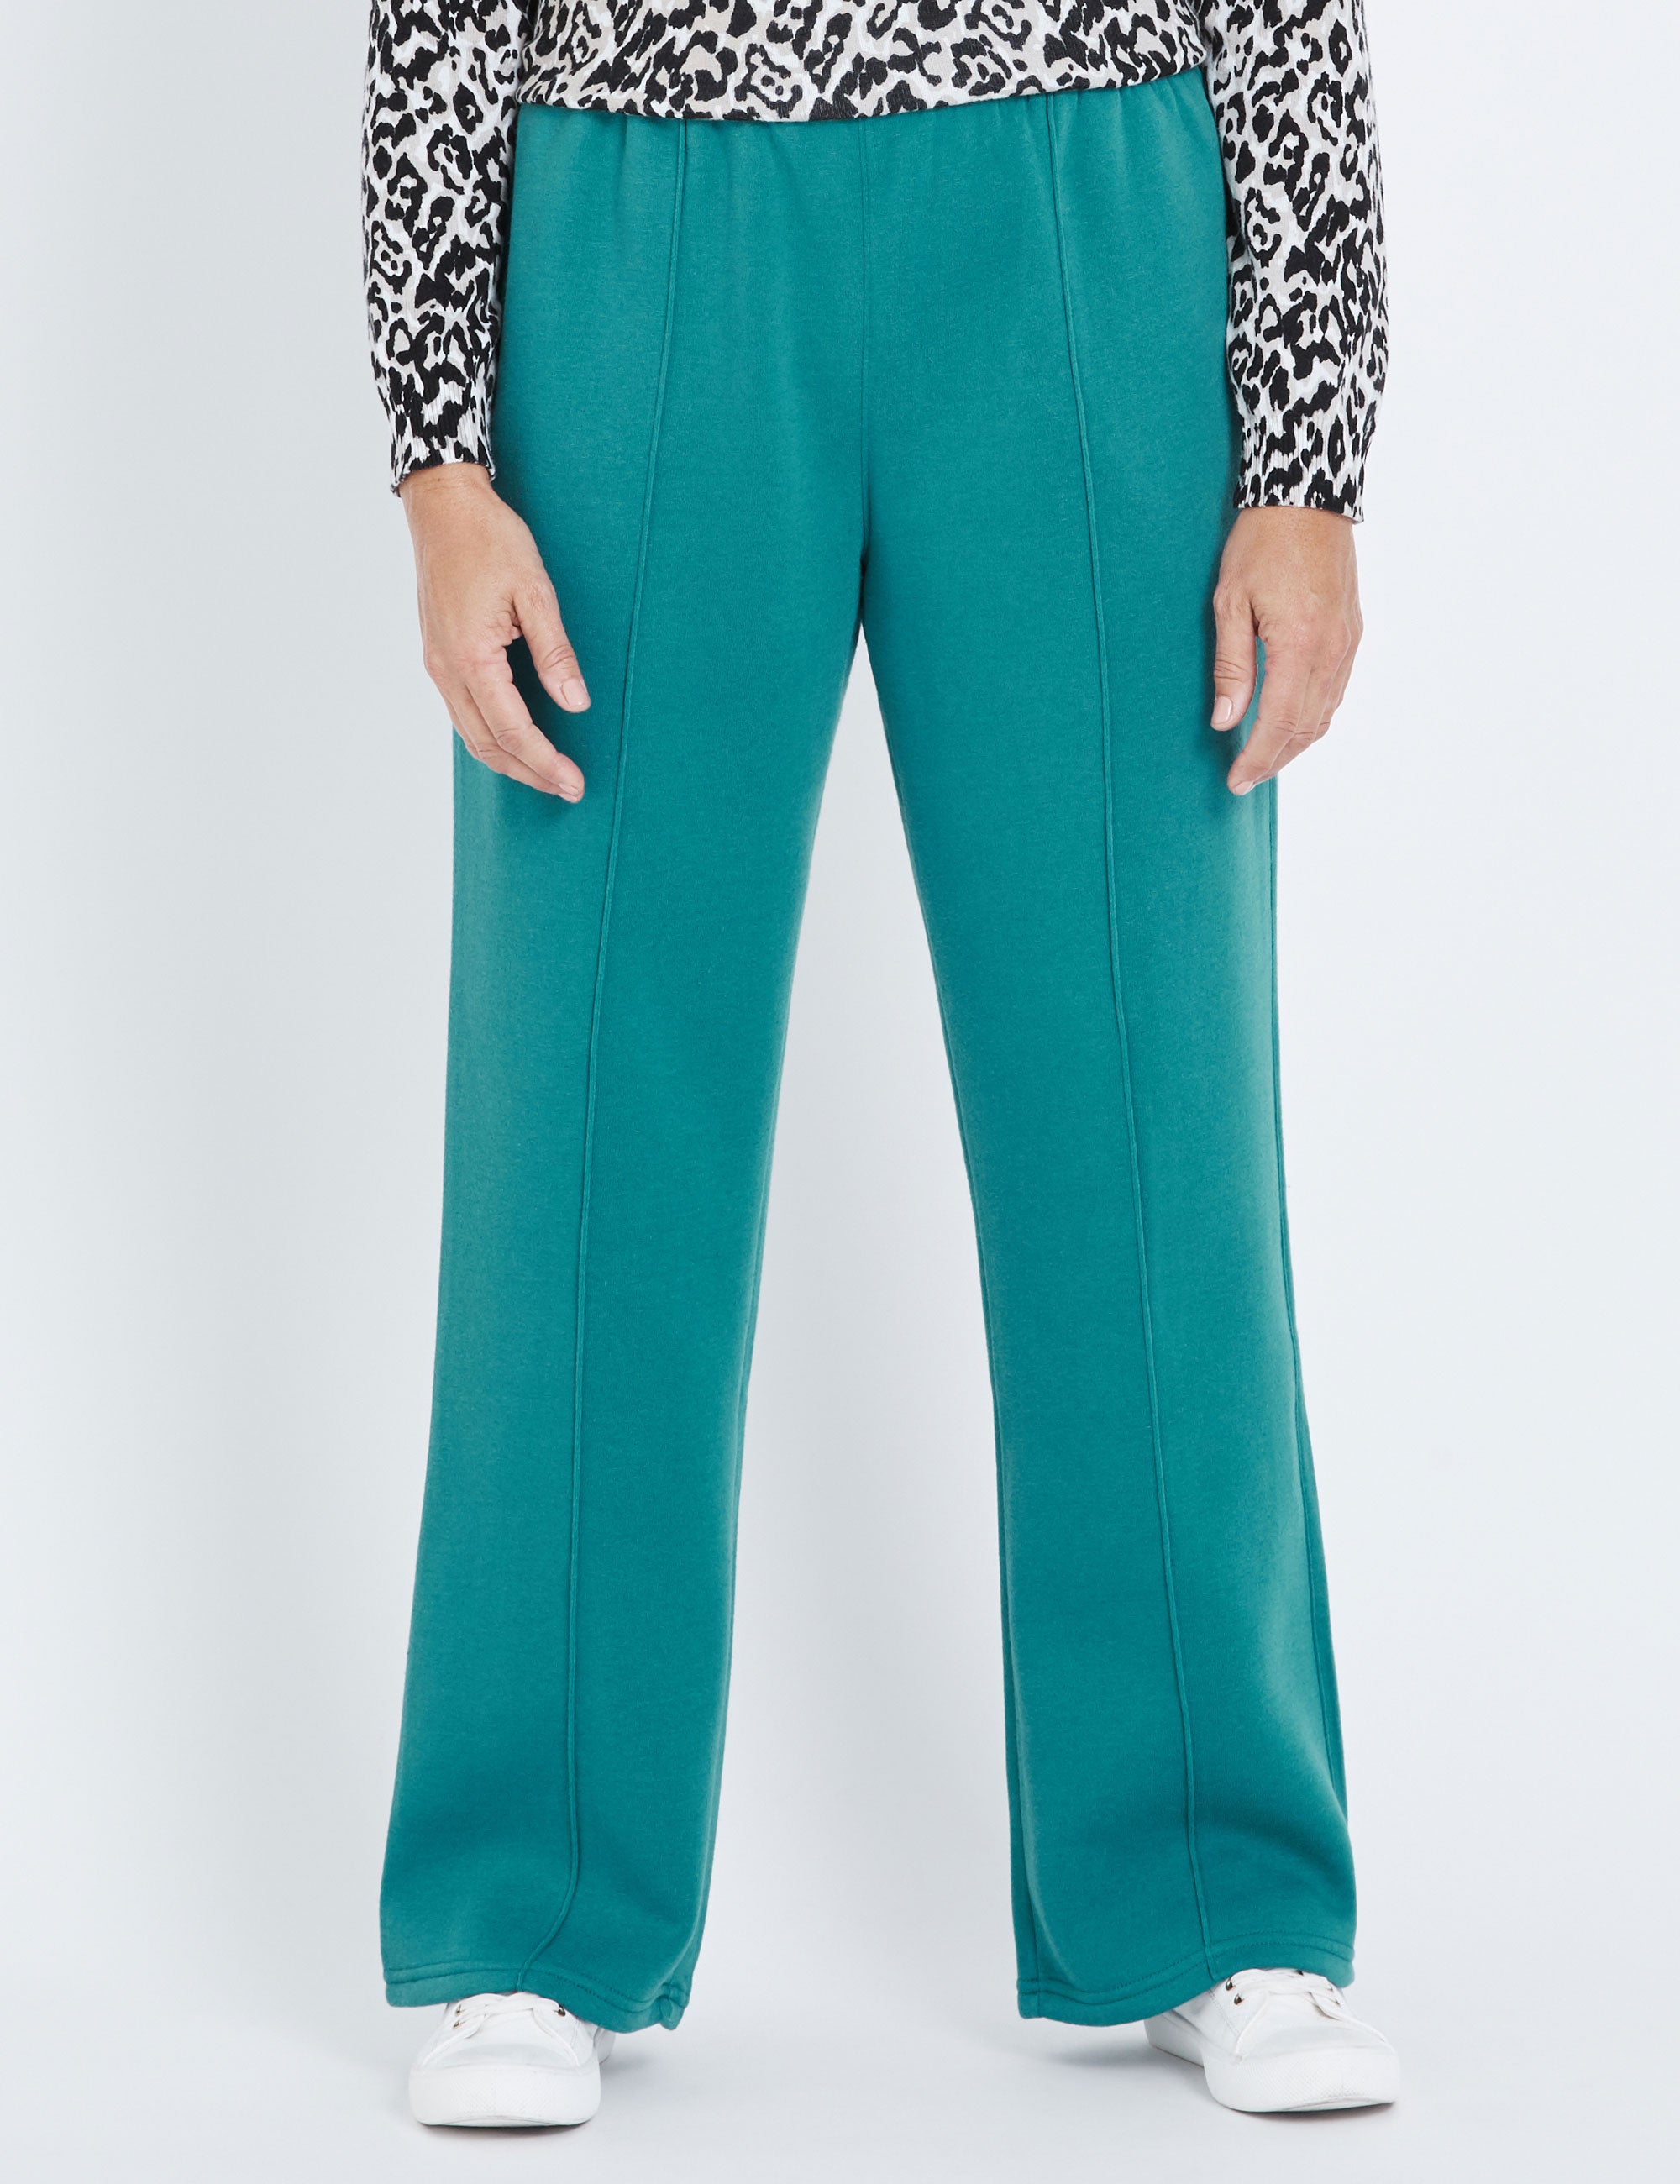 MILLERS FULL LENGTH PINTUCK PULL ON PANTS | Millers